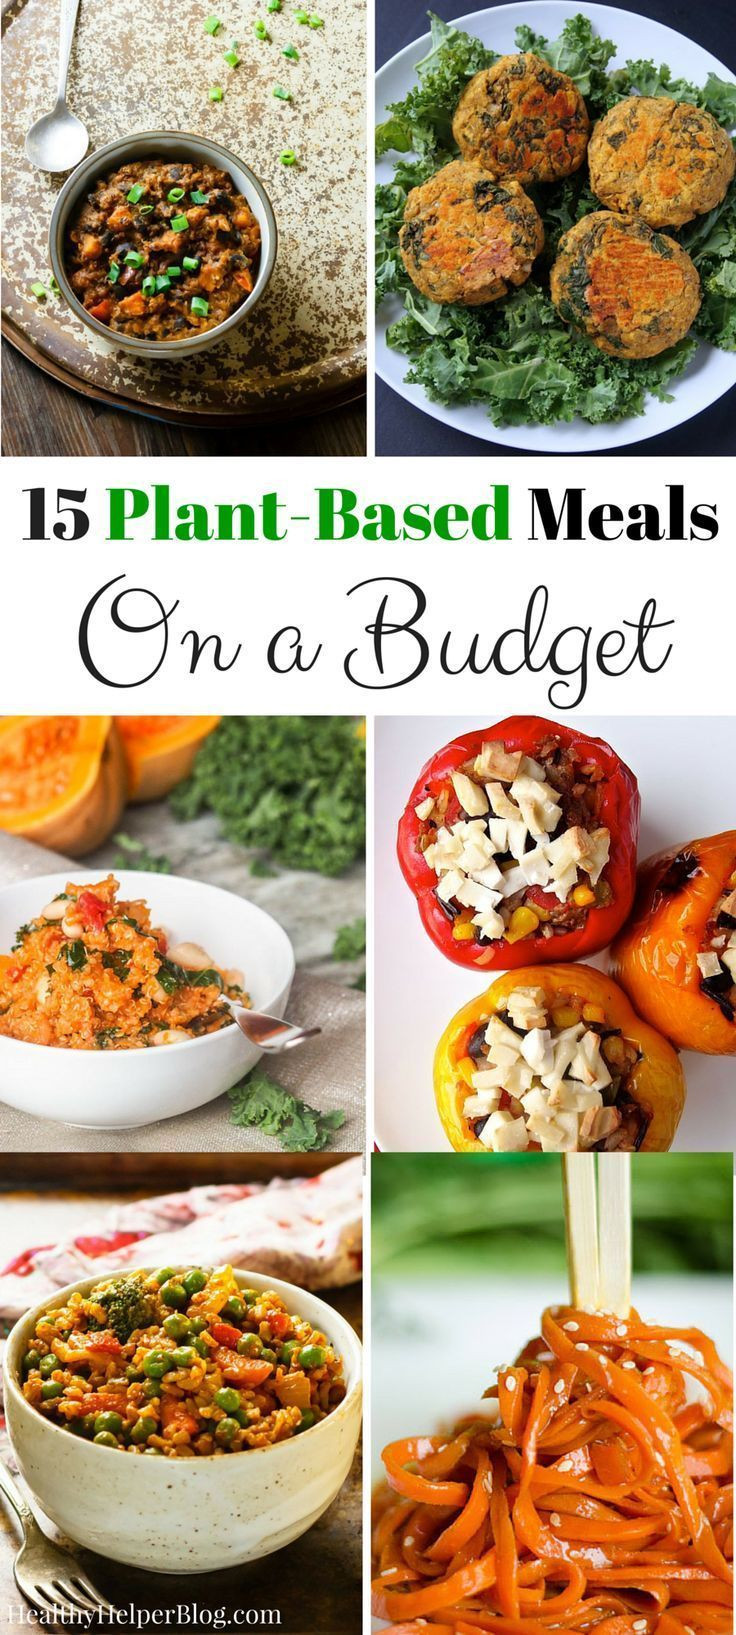 Vegetarian Recipes On A Budget
 228 best images about Eating Healthy on a Bud on